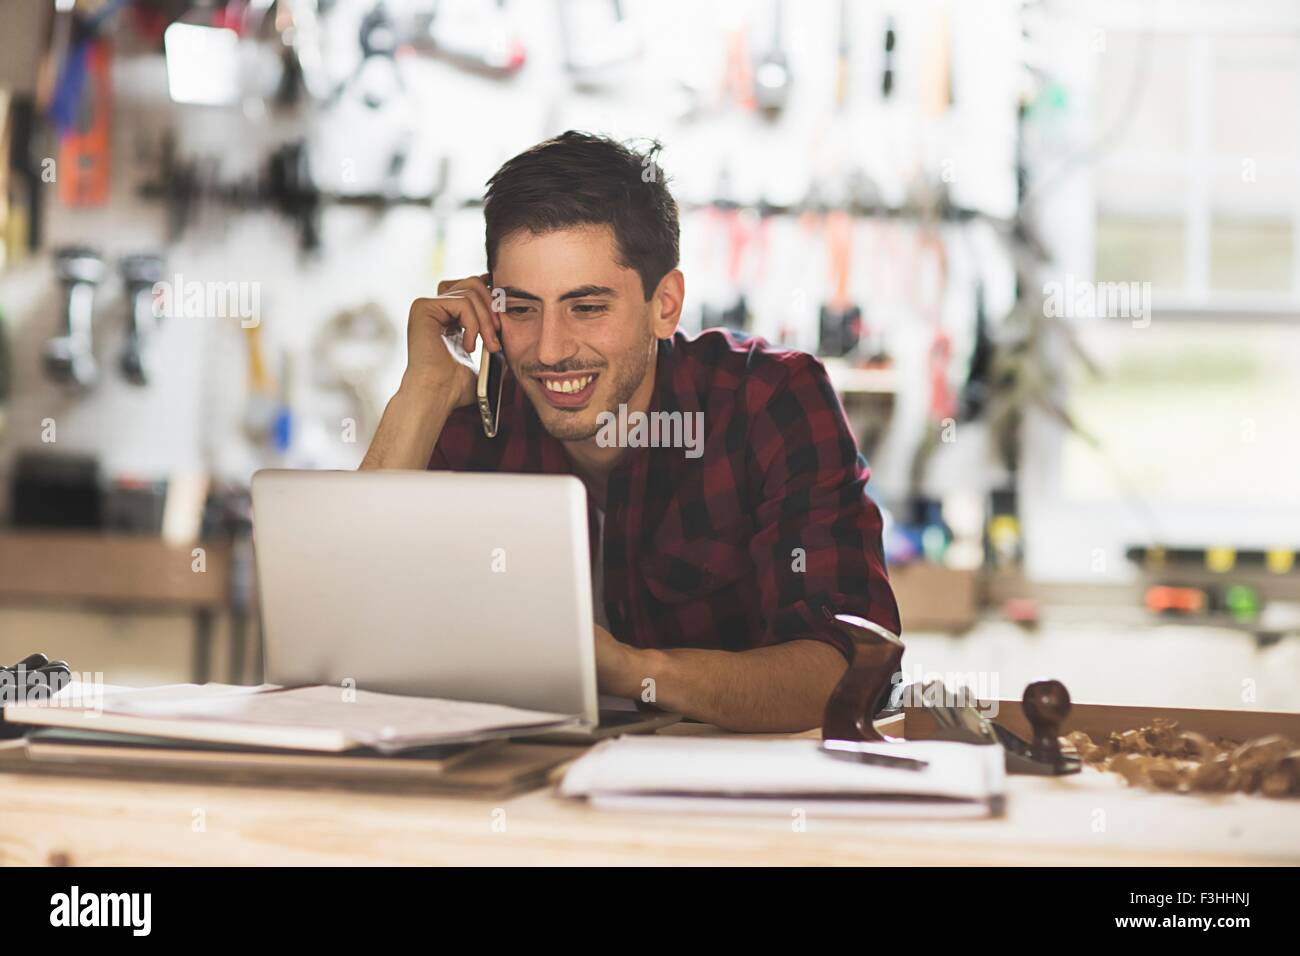 Young man sitting at desk in workshop talking on phone using laptop smiling Stock Photo